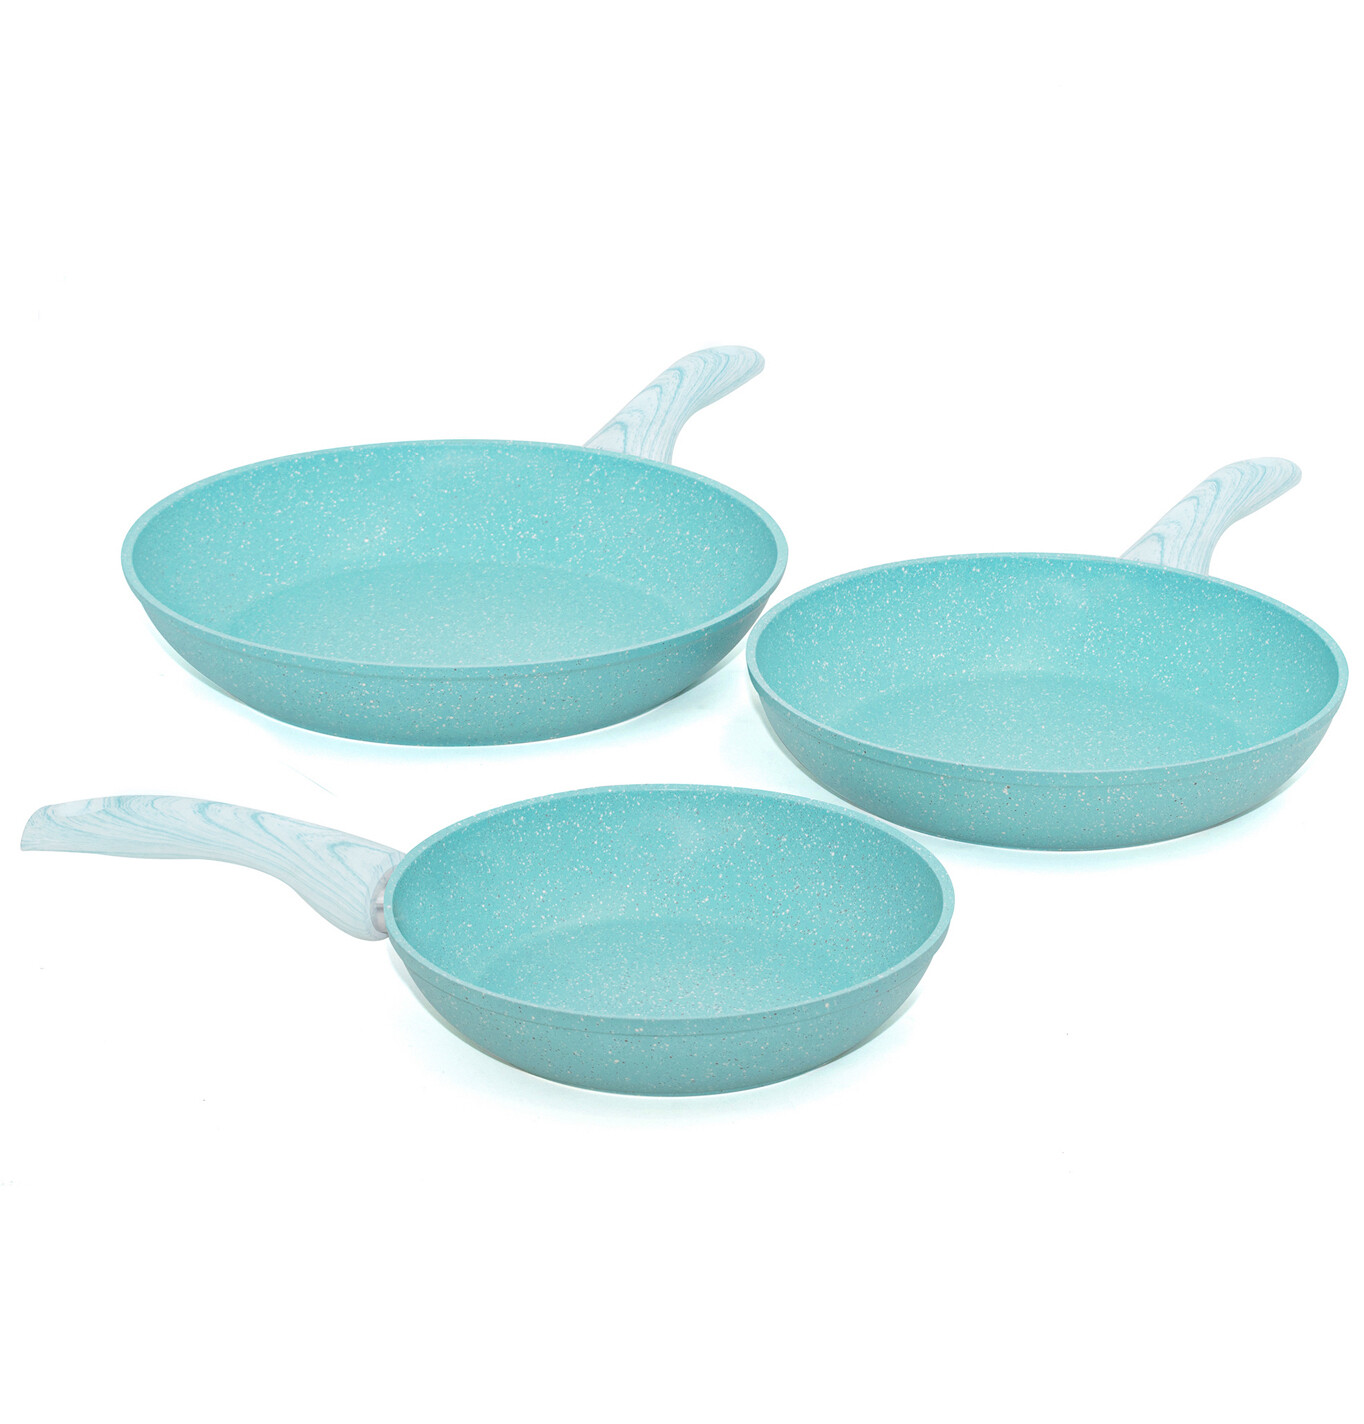 3 pieces cookware set 'Miss Gourmet' with turquoise wood colour handles